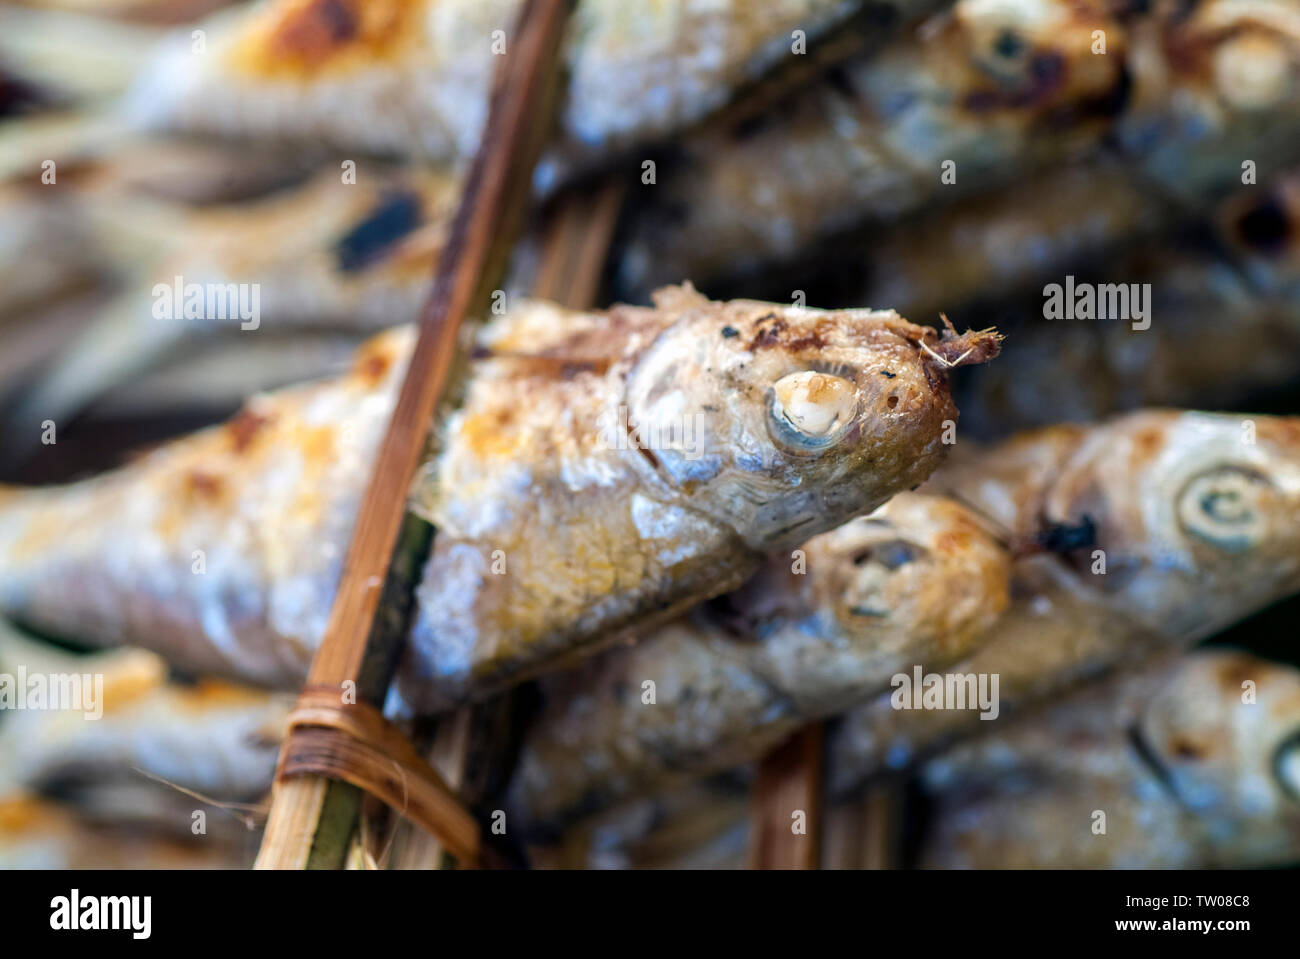 Barbecued fish for sale in Luang Prabang, Lao PDR. Stock Photo